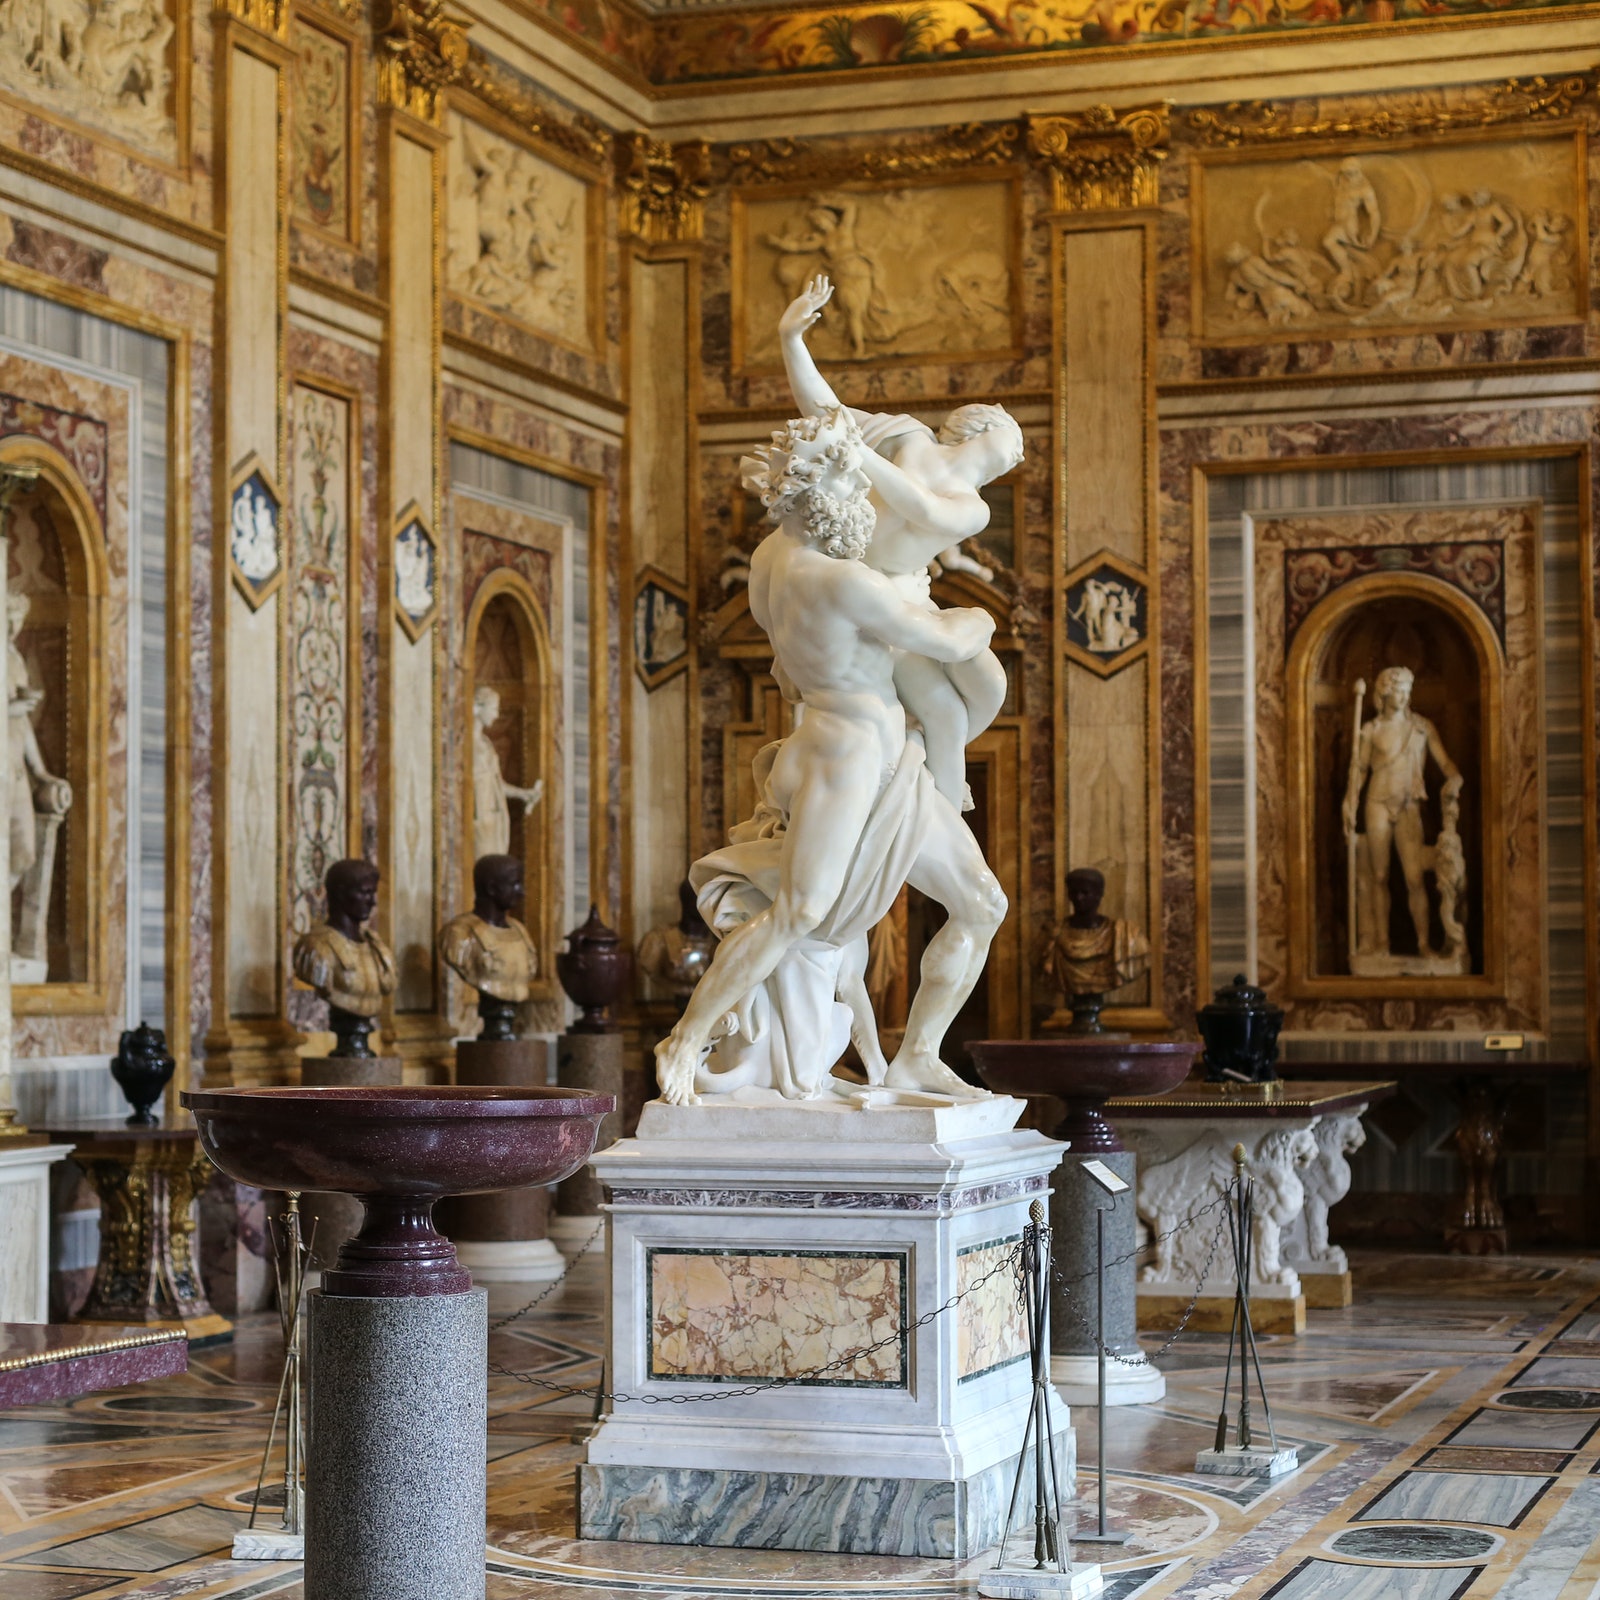 Borghese Gallery in Italy